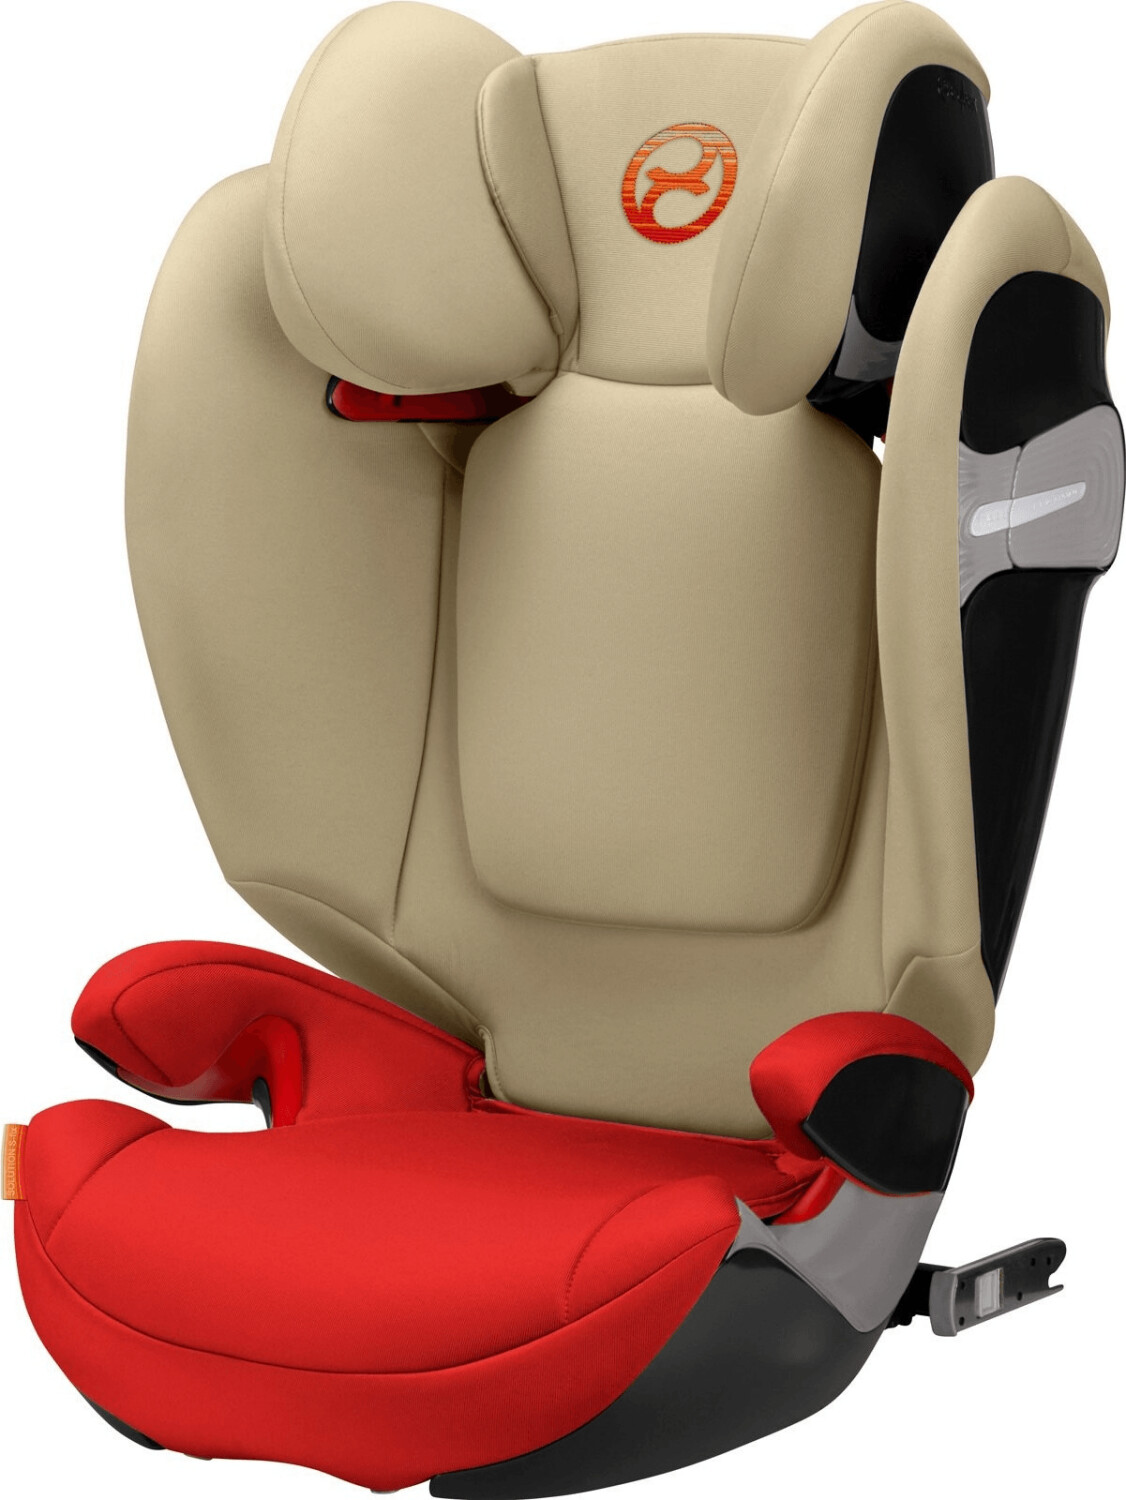 Cybex Solution S2 i-Fix Highback Booster Car Seat - Classic Beige from